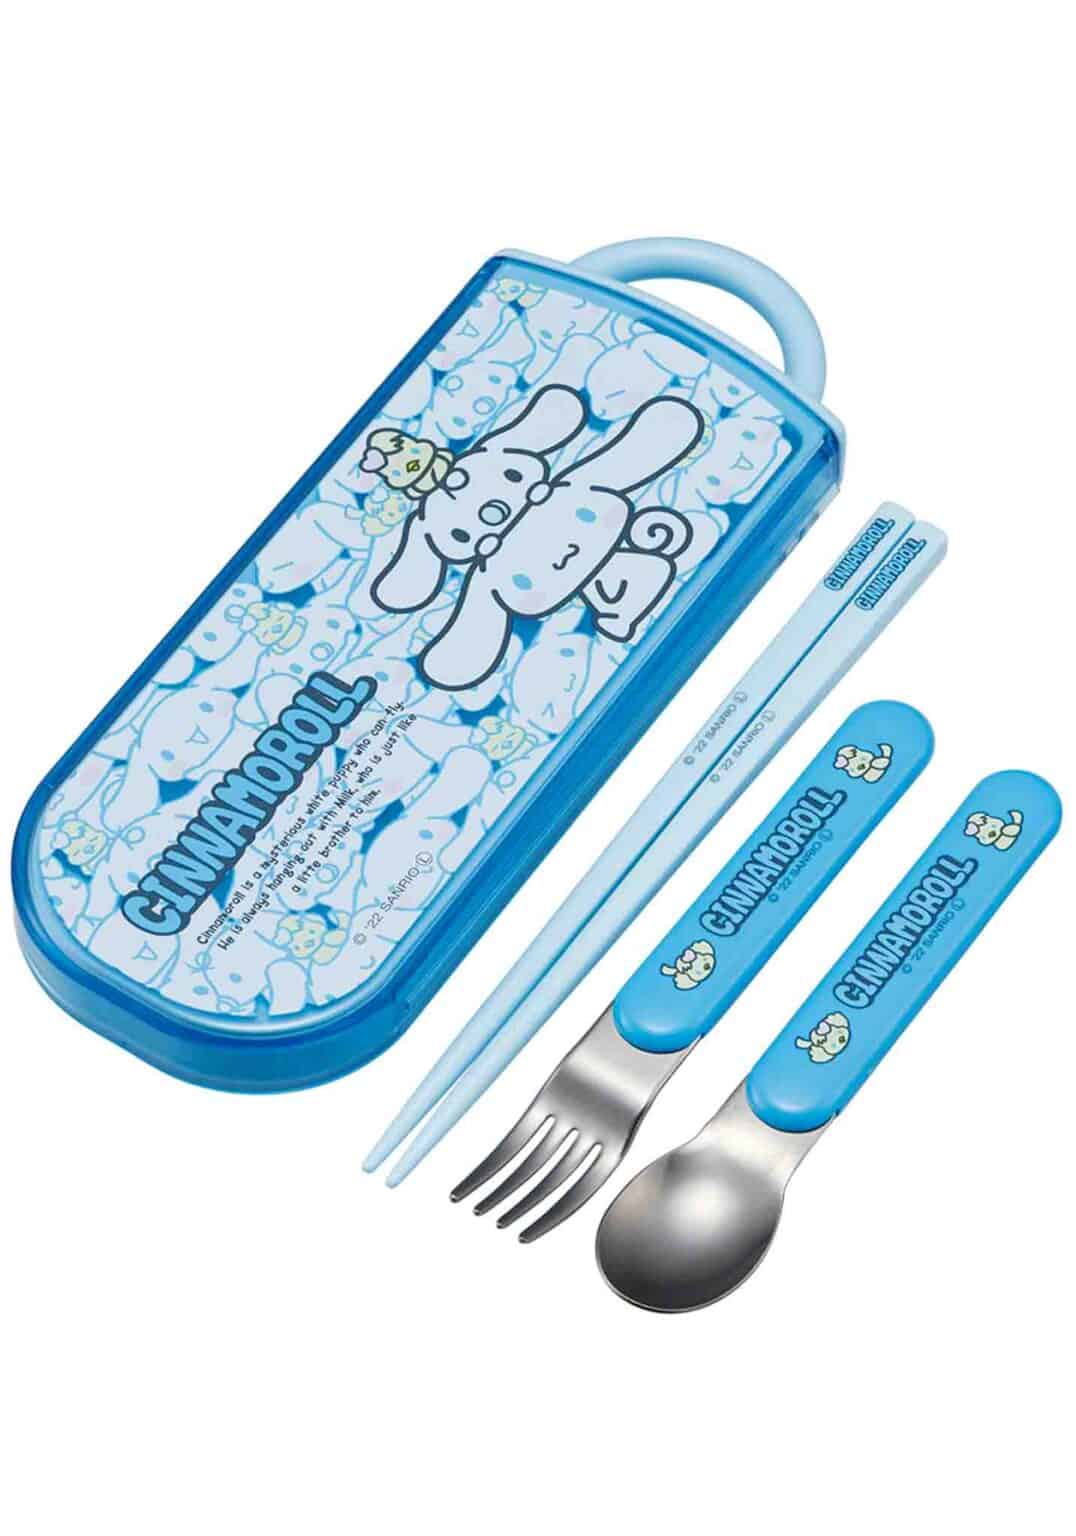 My Melody Lunch Tableware Spoon Chopsticks Fork Utensils Set in Case Pink  Sanrio Inspired by You.